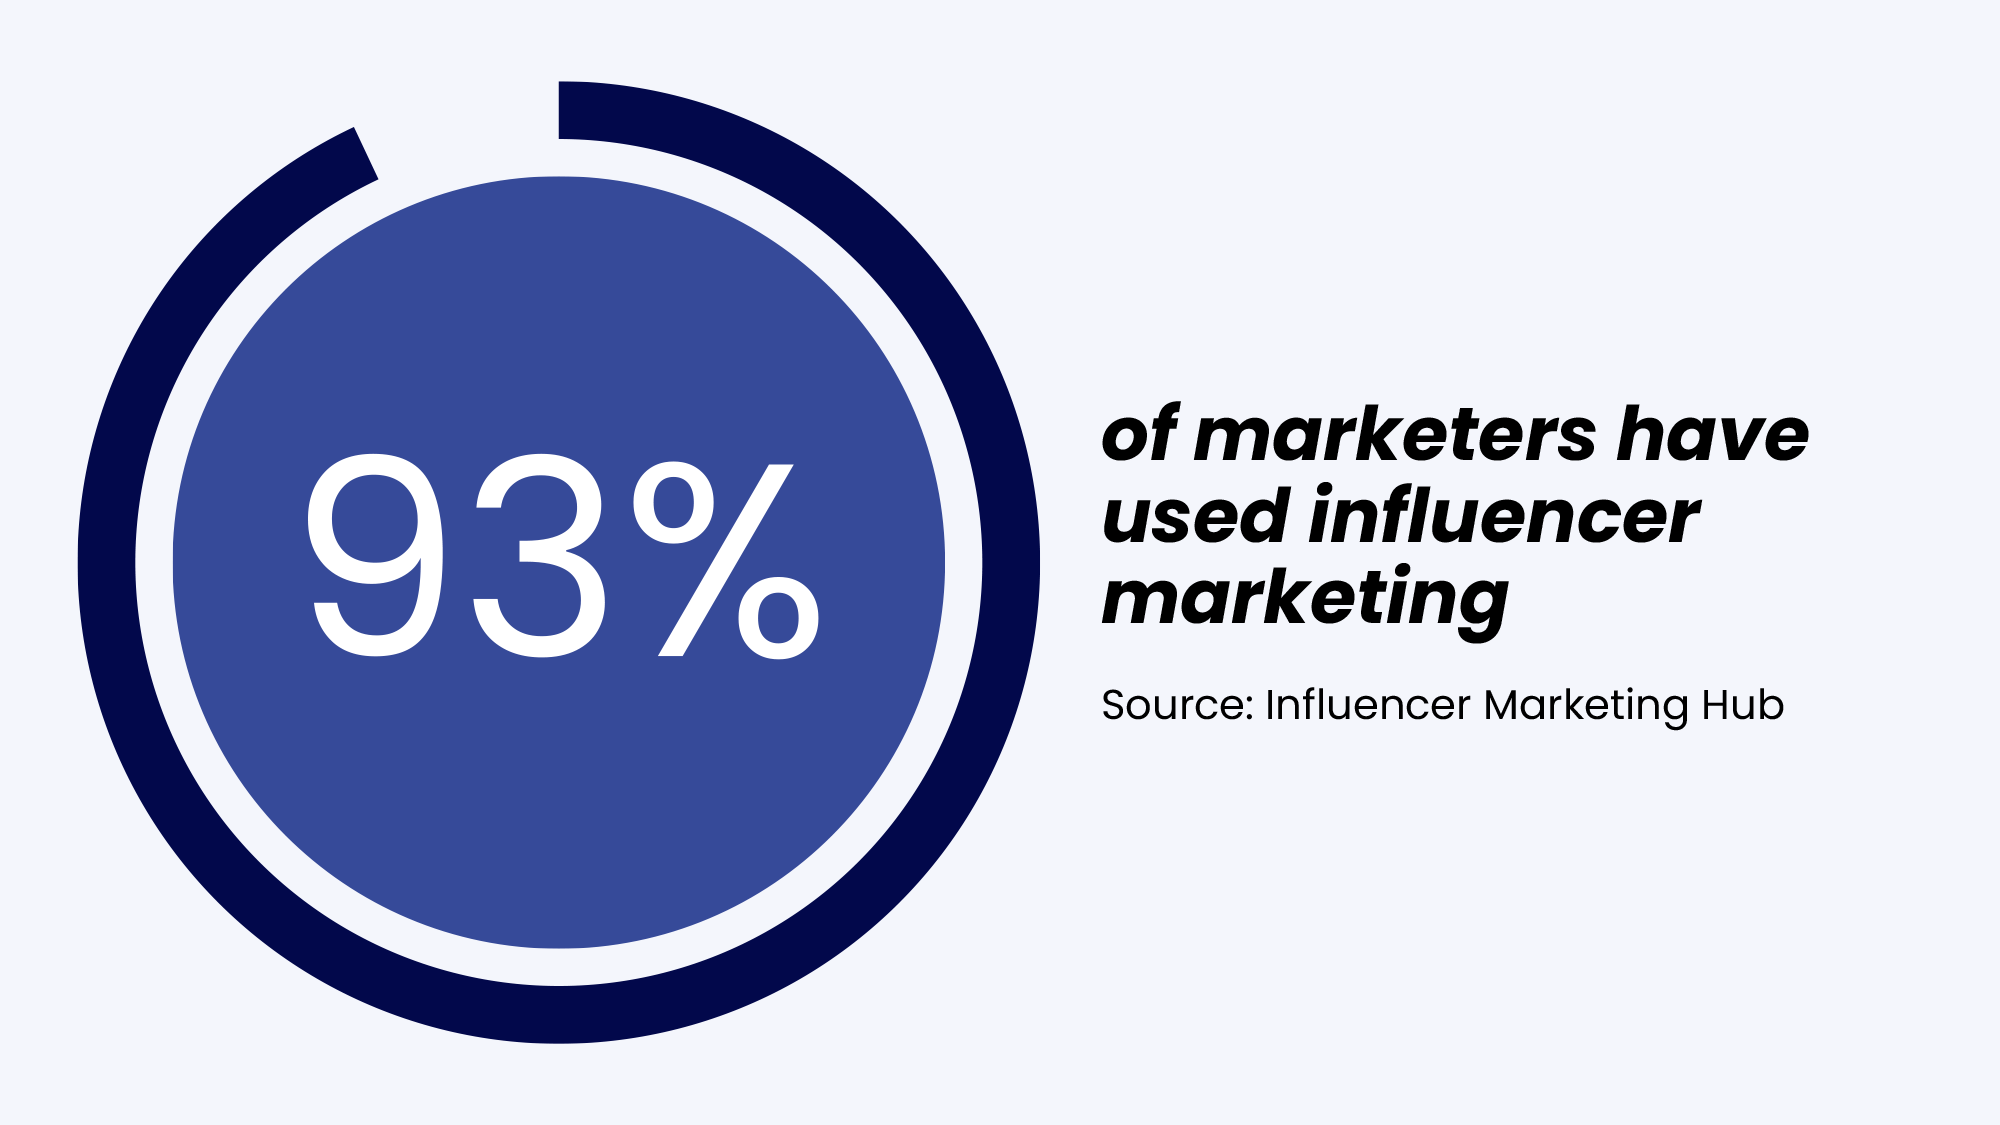 93% of marketers have used influencer marketing